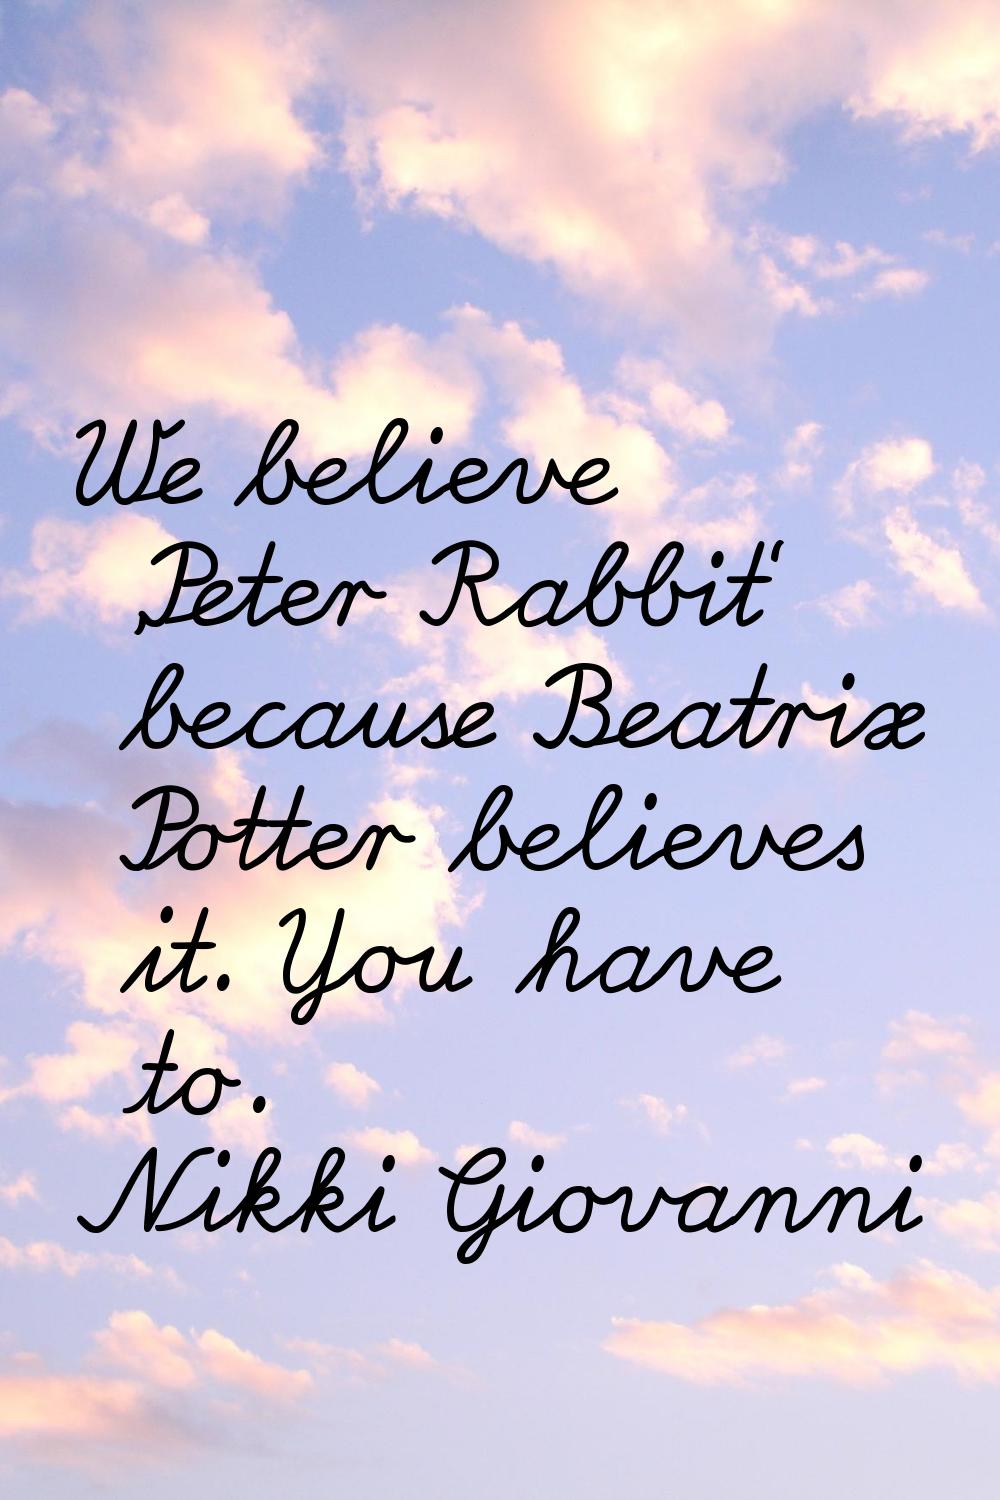 We believe 'Peter Rabbit' because Beatrix Potter believes it. You have to.